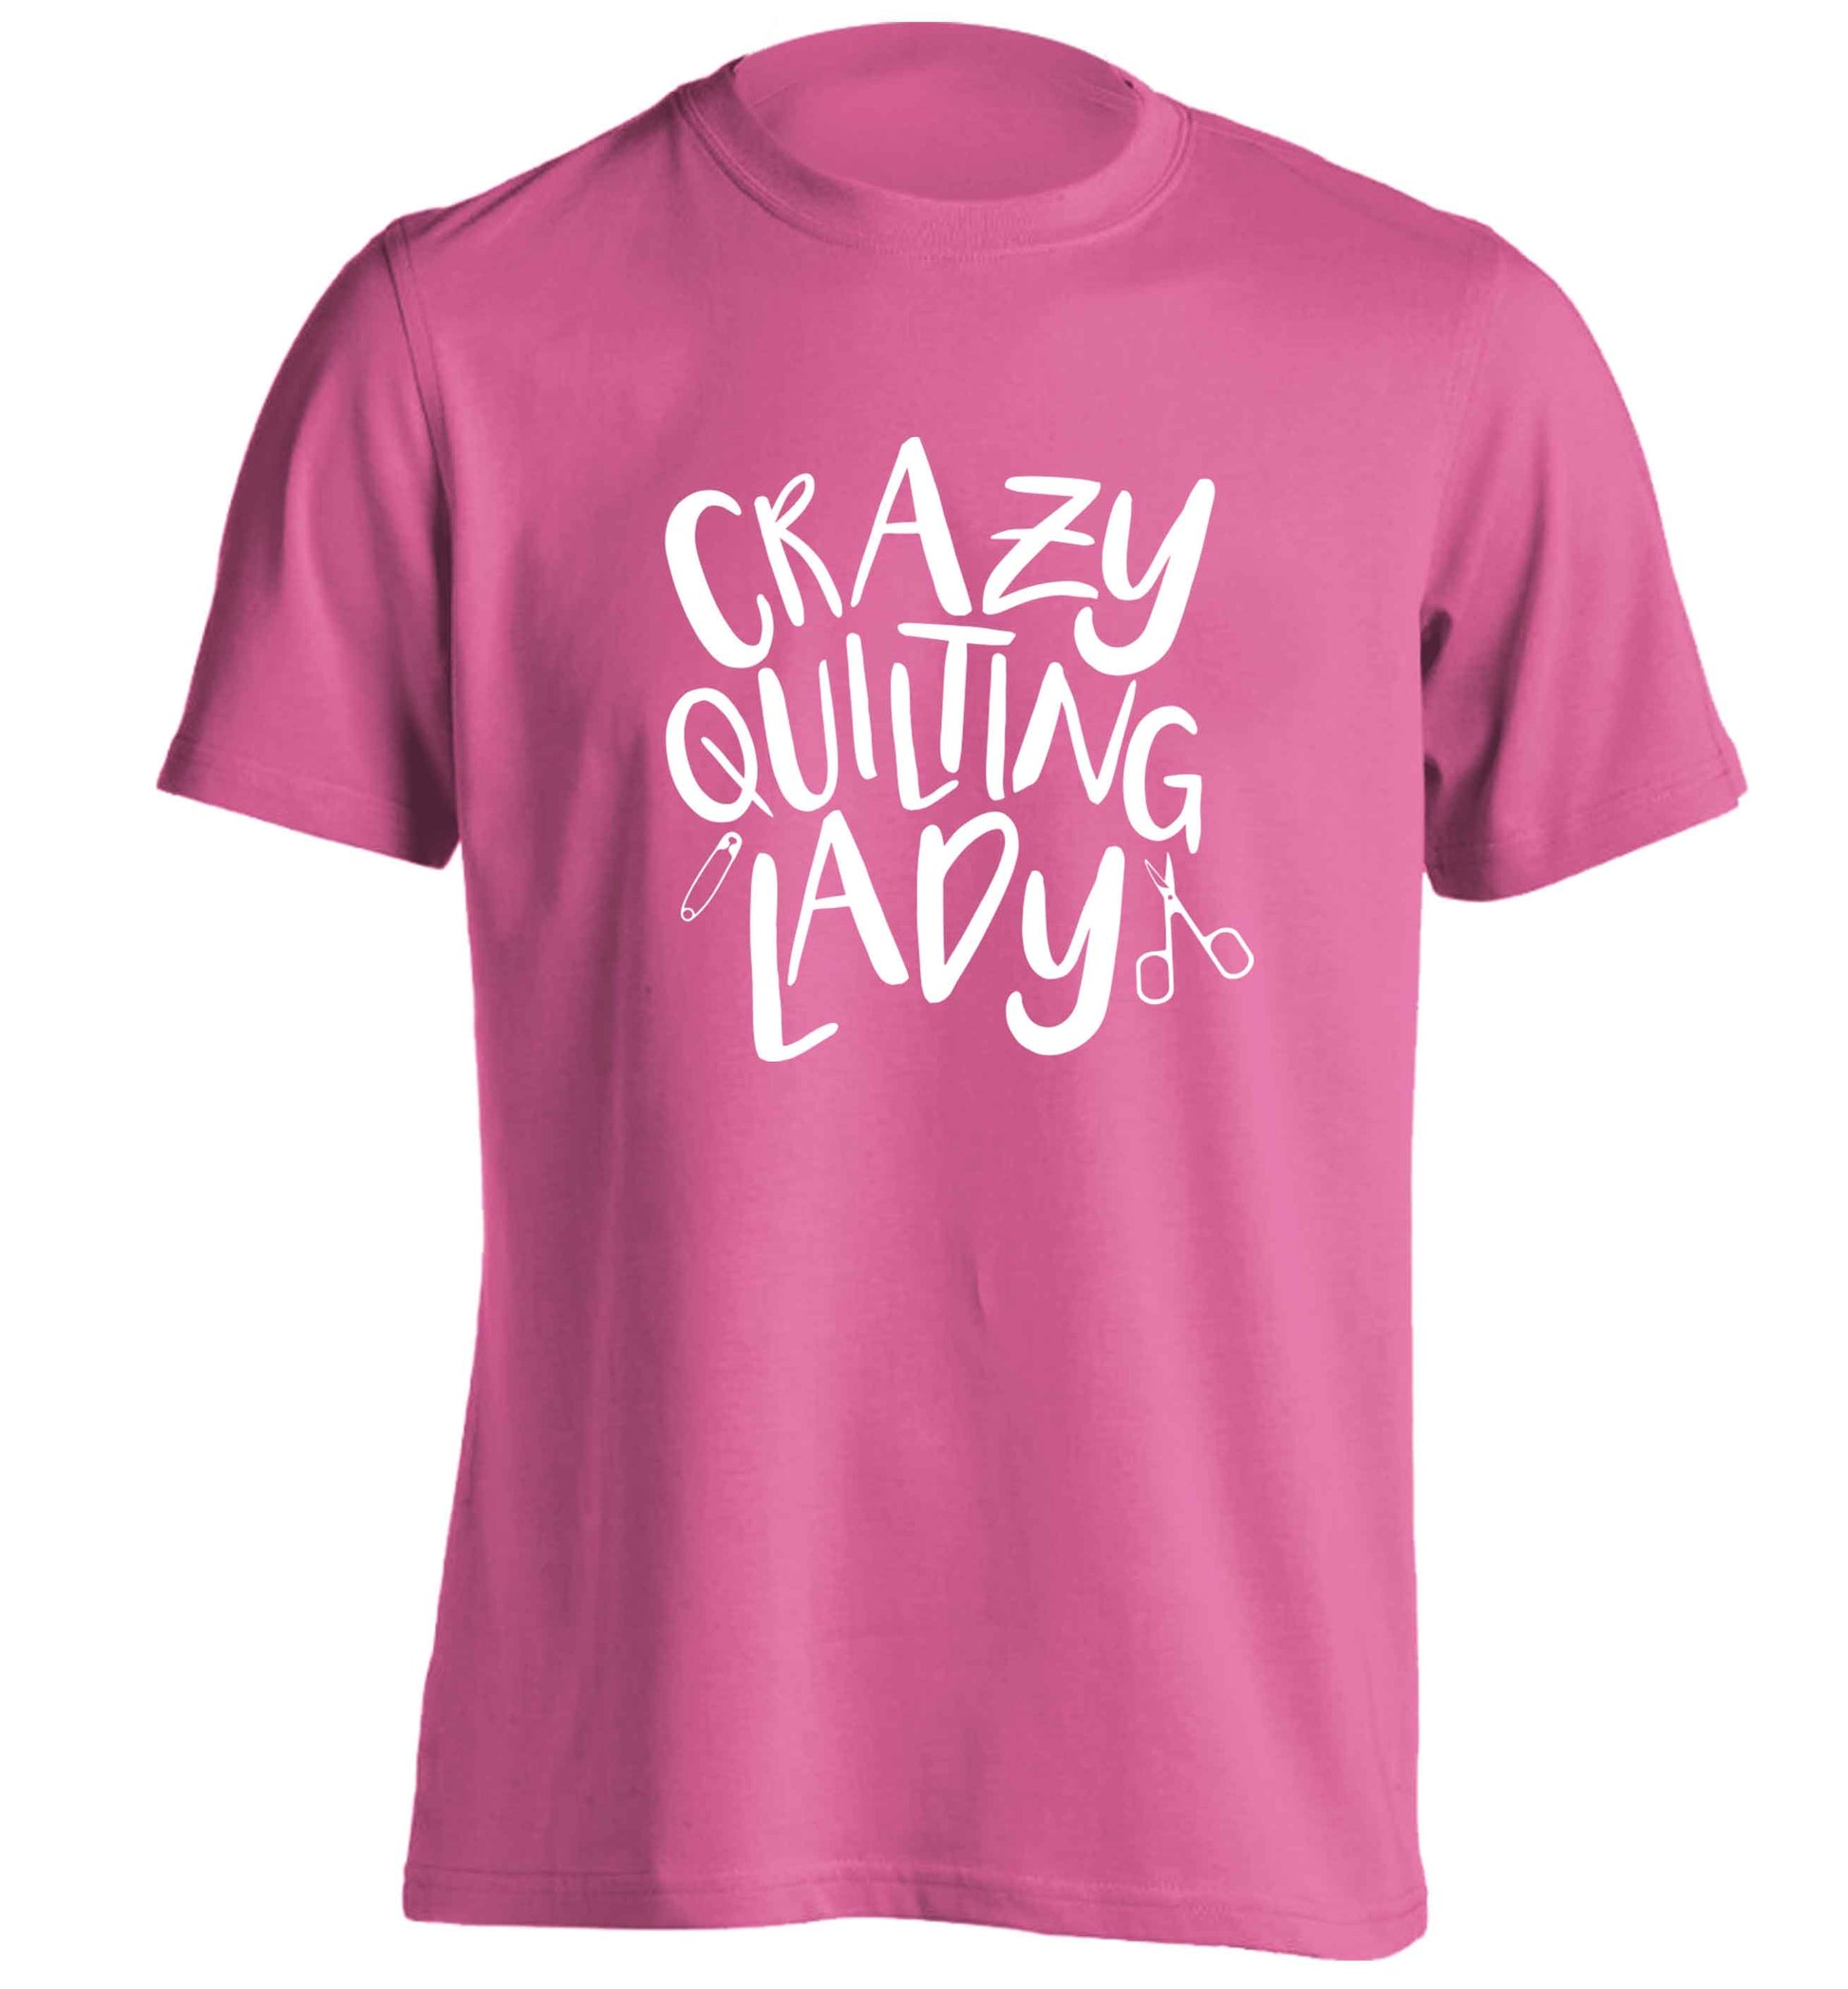 Crazy quilting lady adults unisex pink Tshirt 2XL